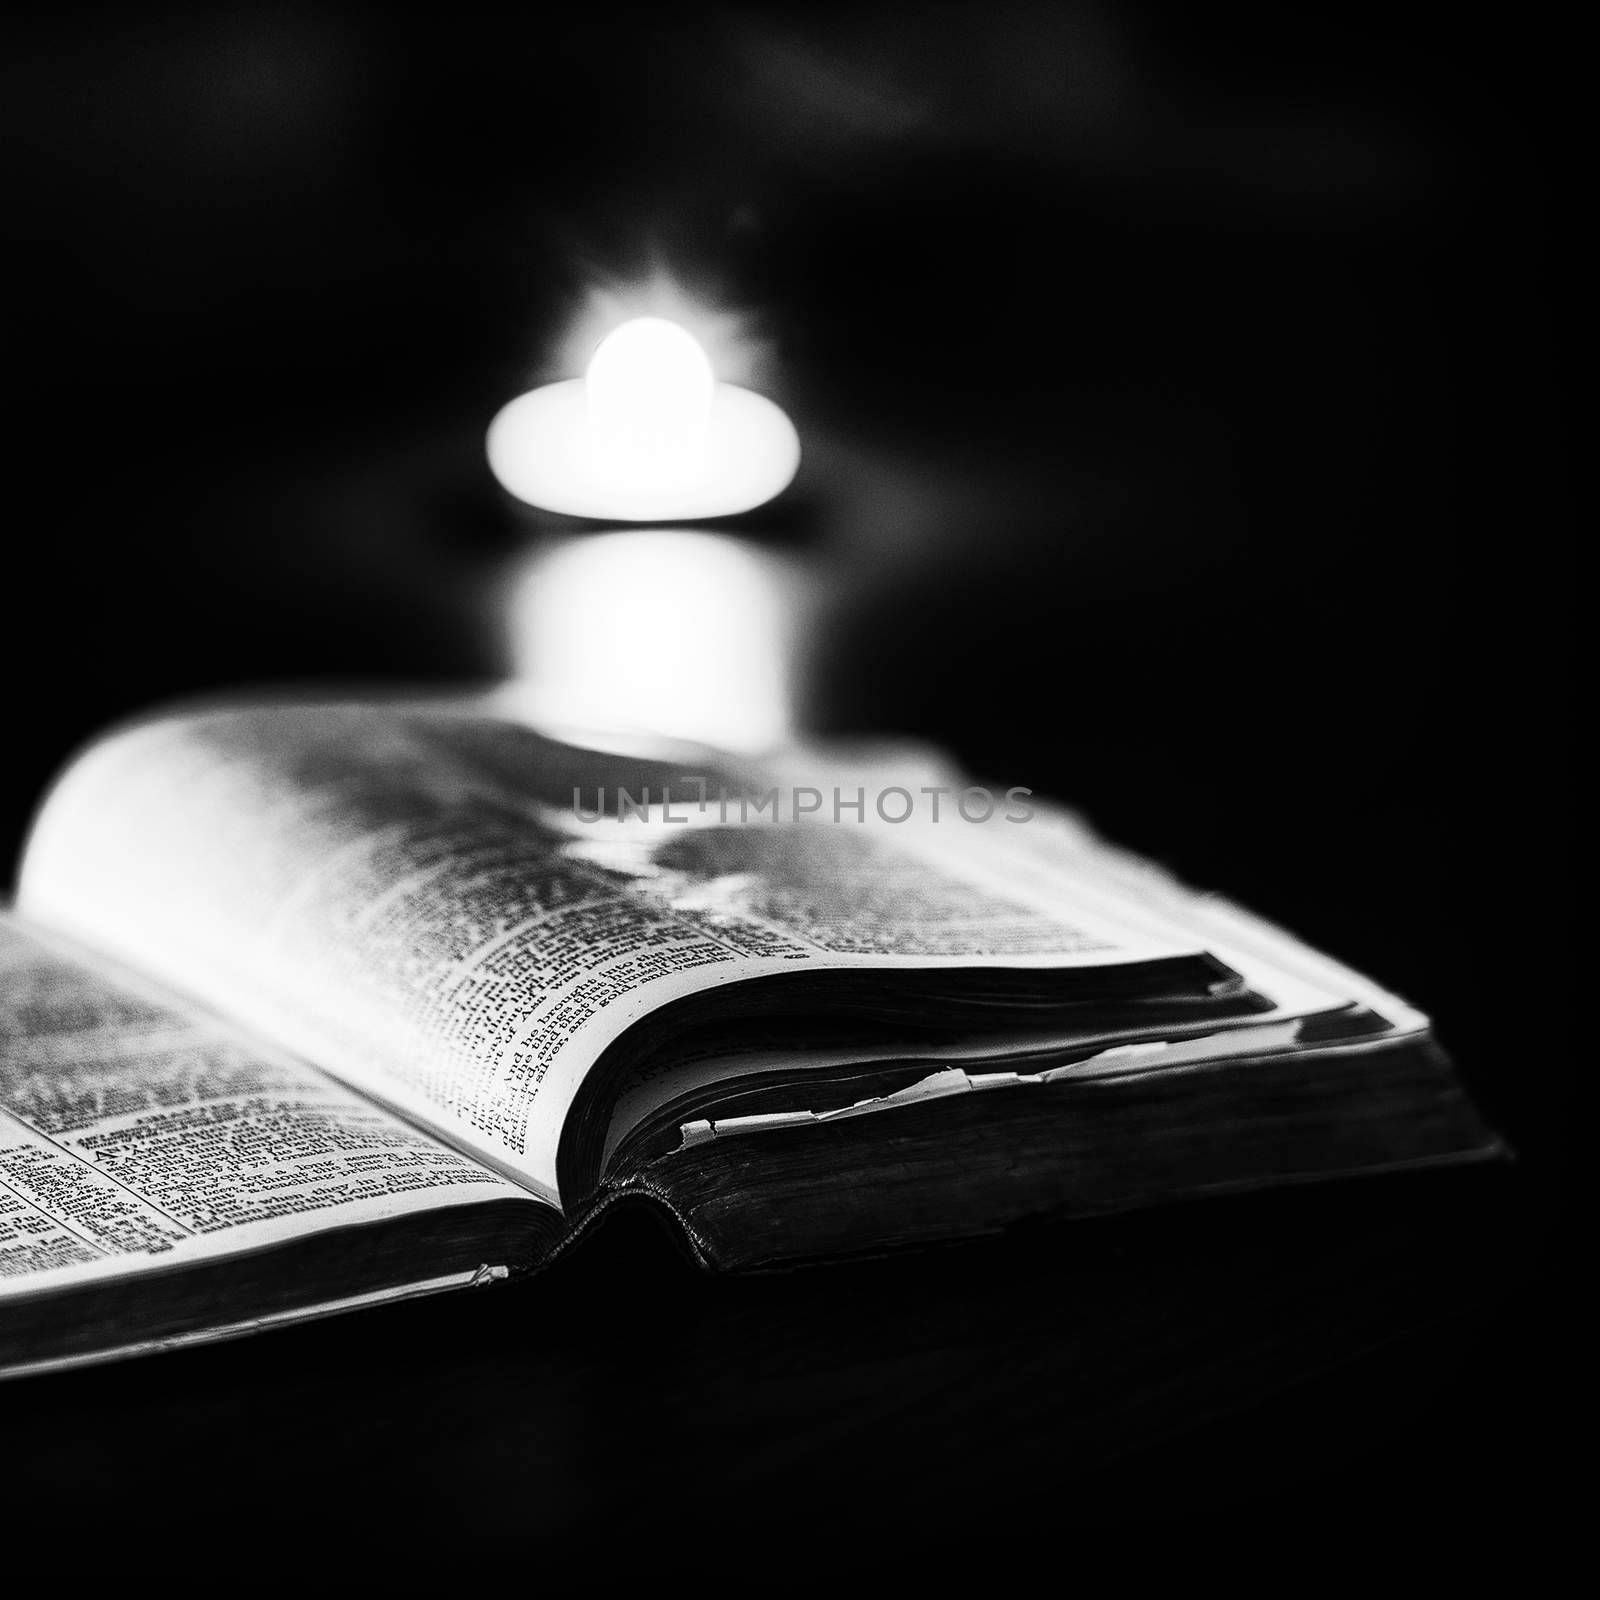 Bible with candles by artistrobd